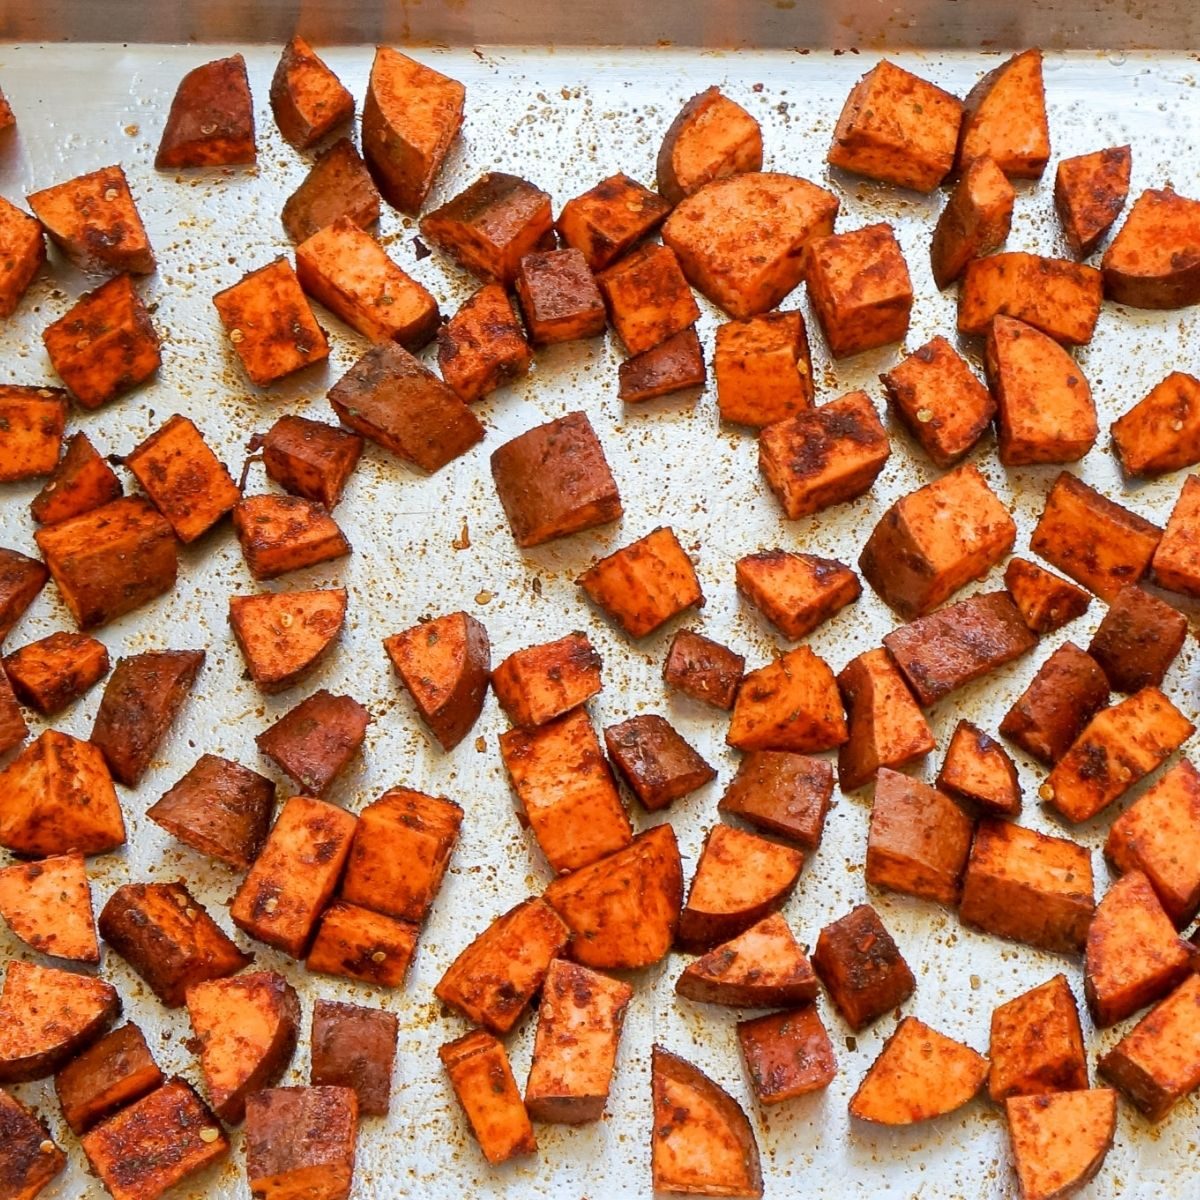 Cubed sweet potatoes, generously spiced on a sheet pan ready to go into a hot oven for roasting.